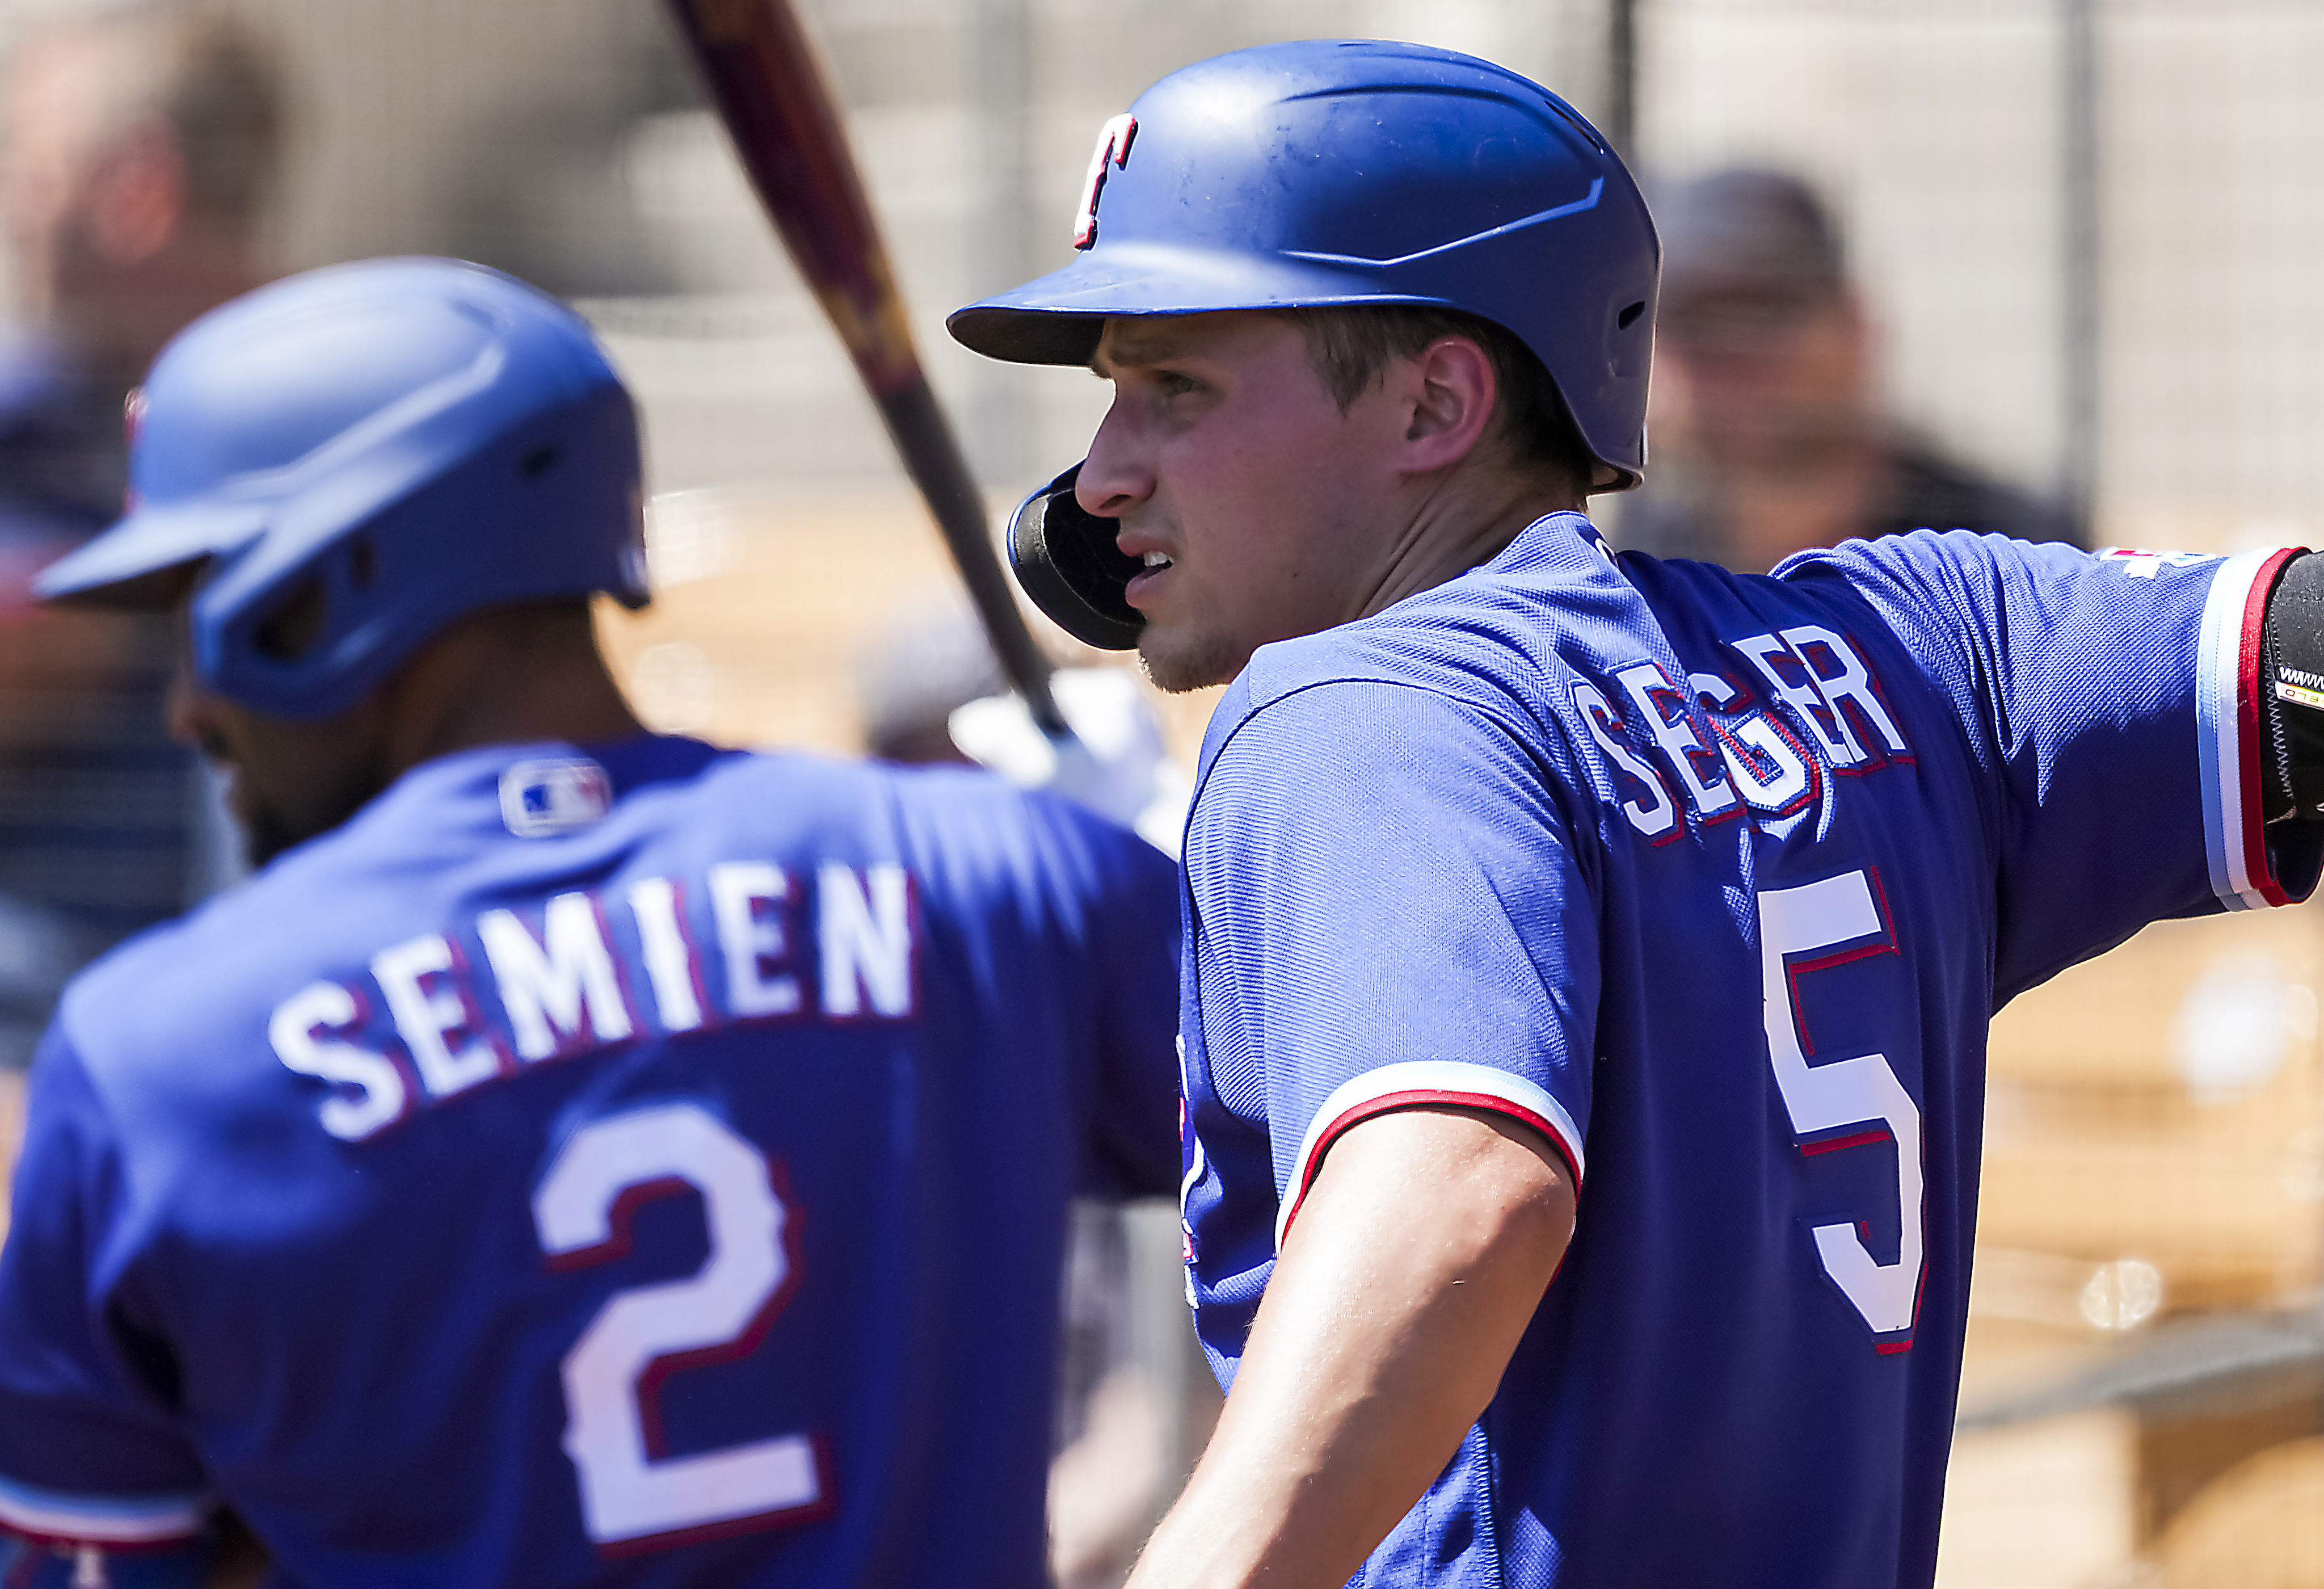 Rangers hope Corey Seager, Marcus Semien can be pillars of sturdy